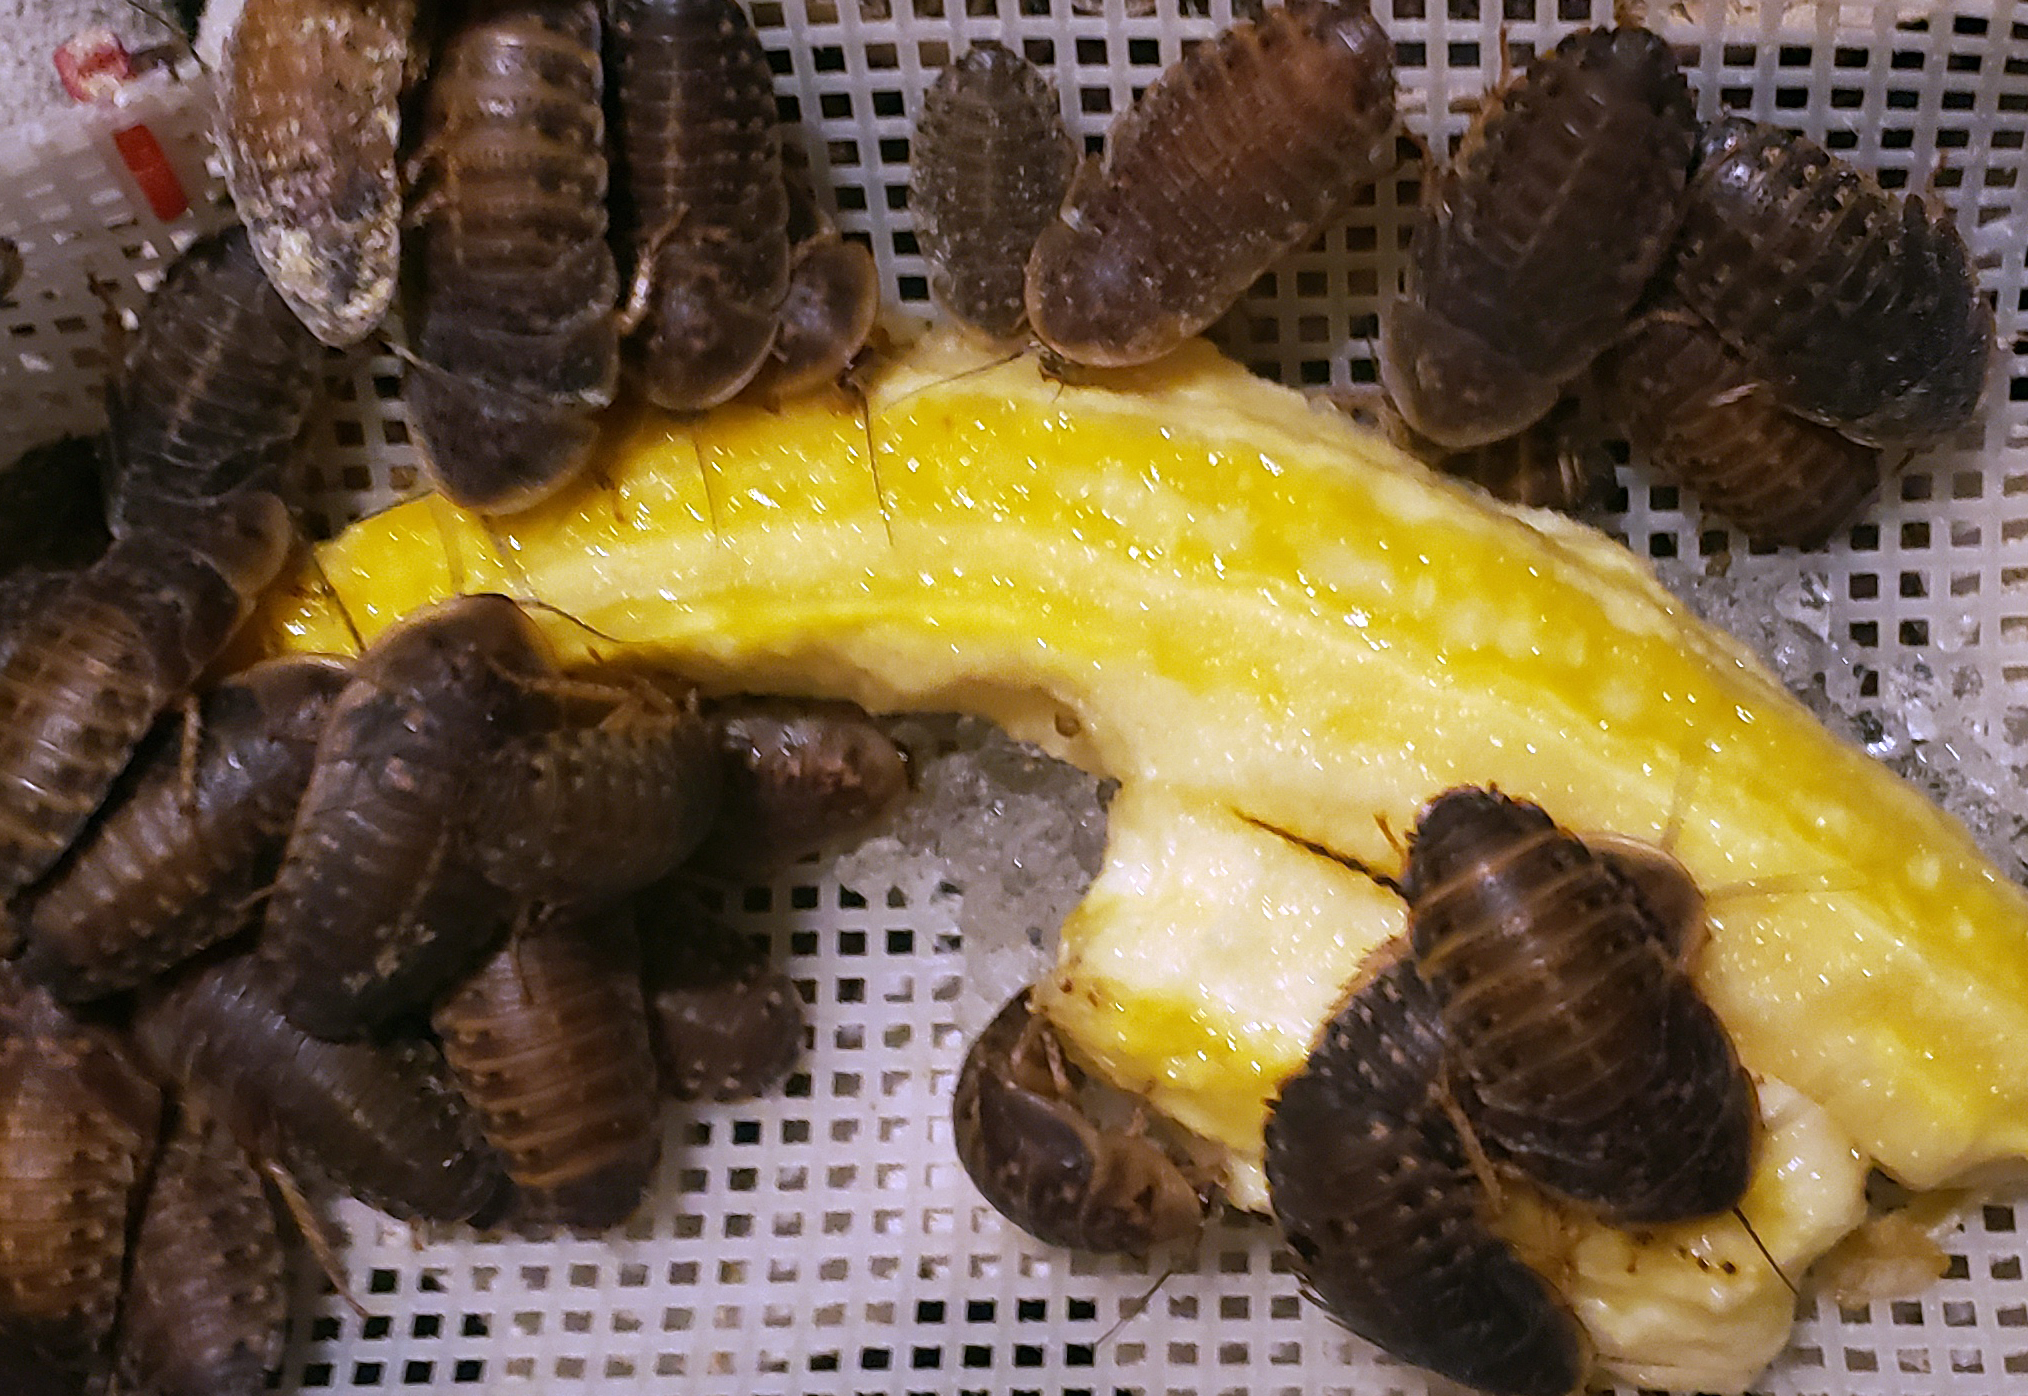 Gut loading dubia roach nymphs with banana